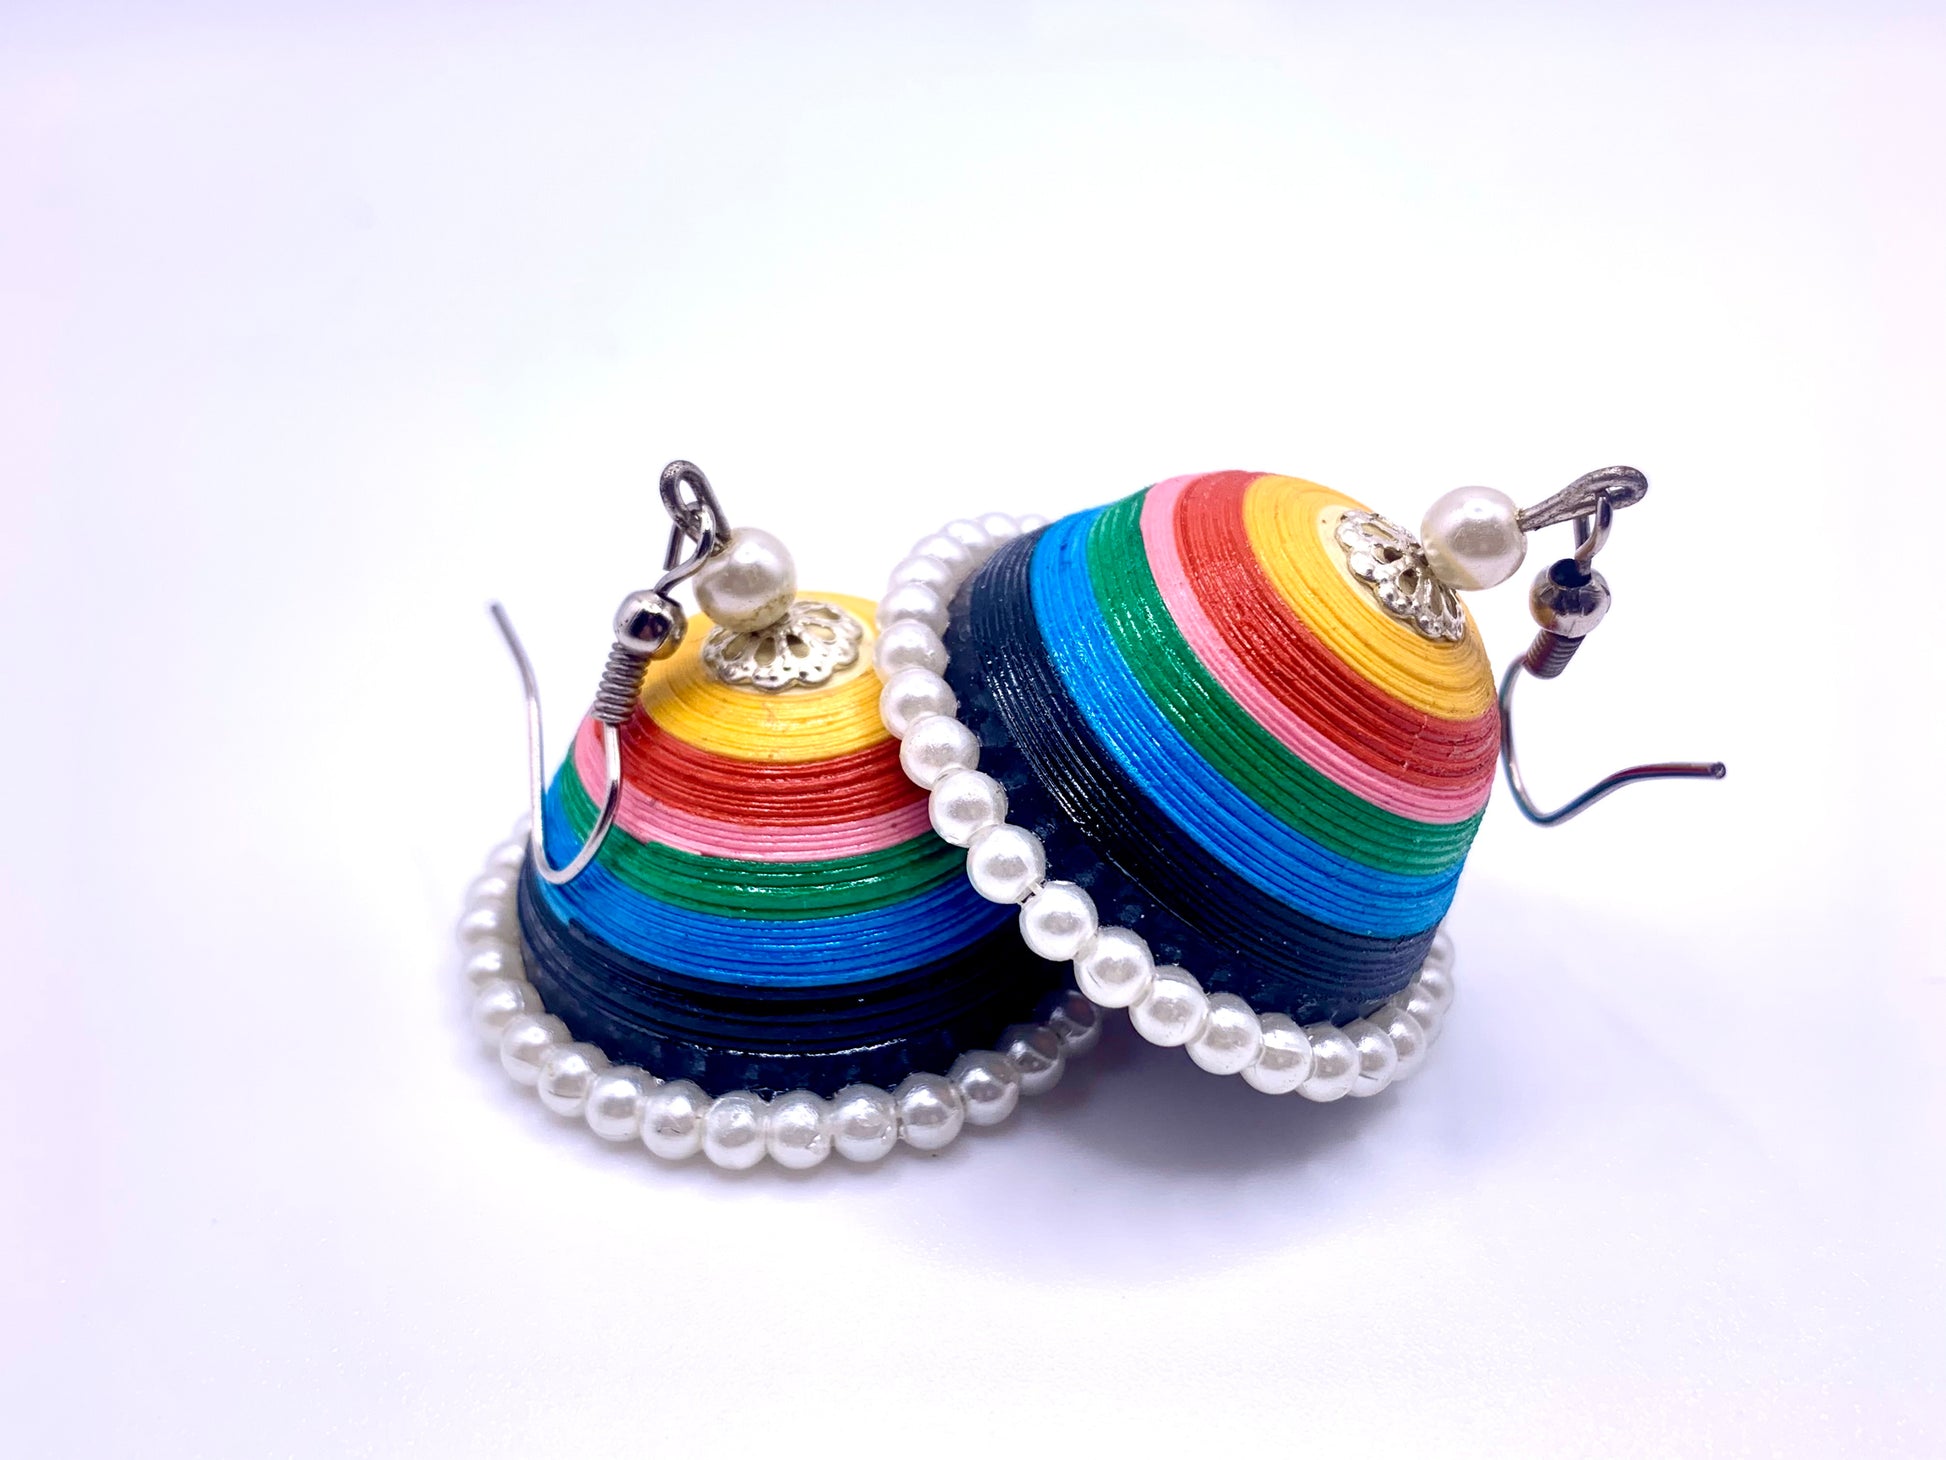 Art Snap: Quilling (Rolled Paper) Earrings - Morean Arts Center